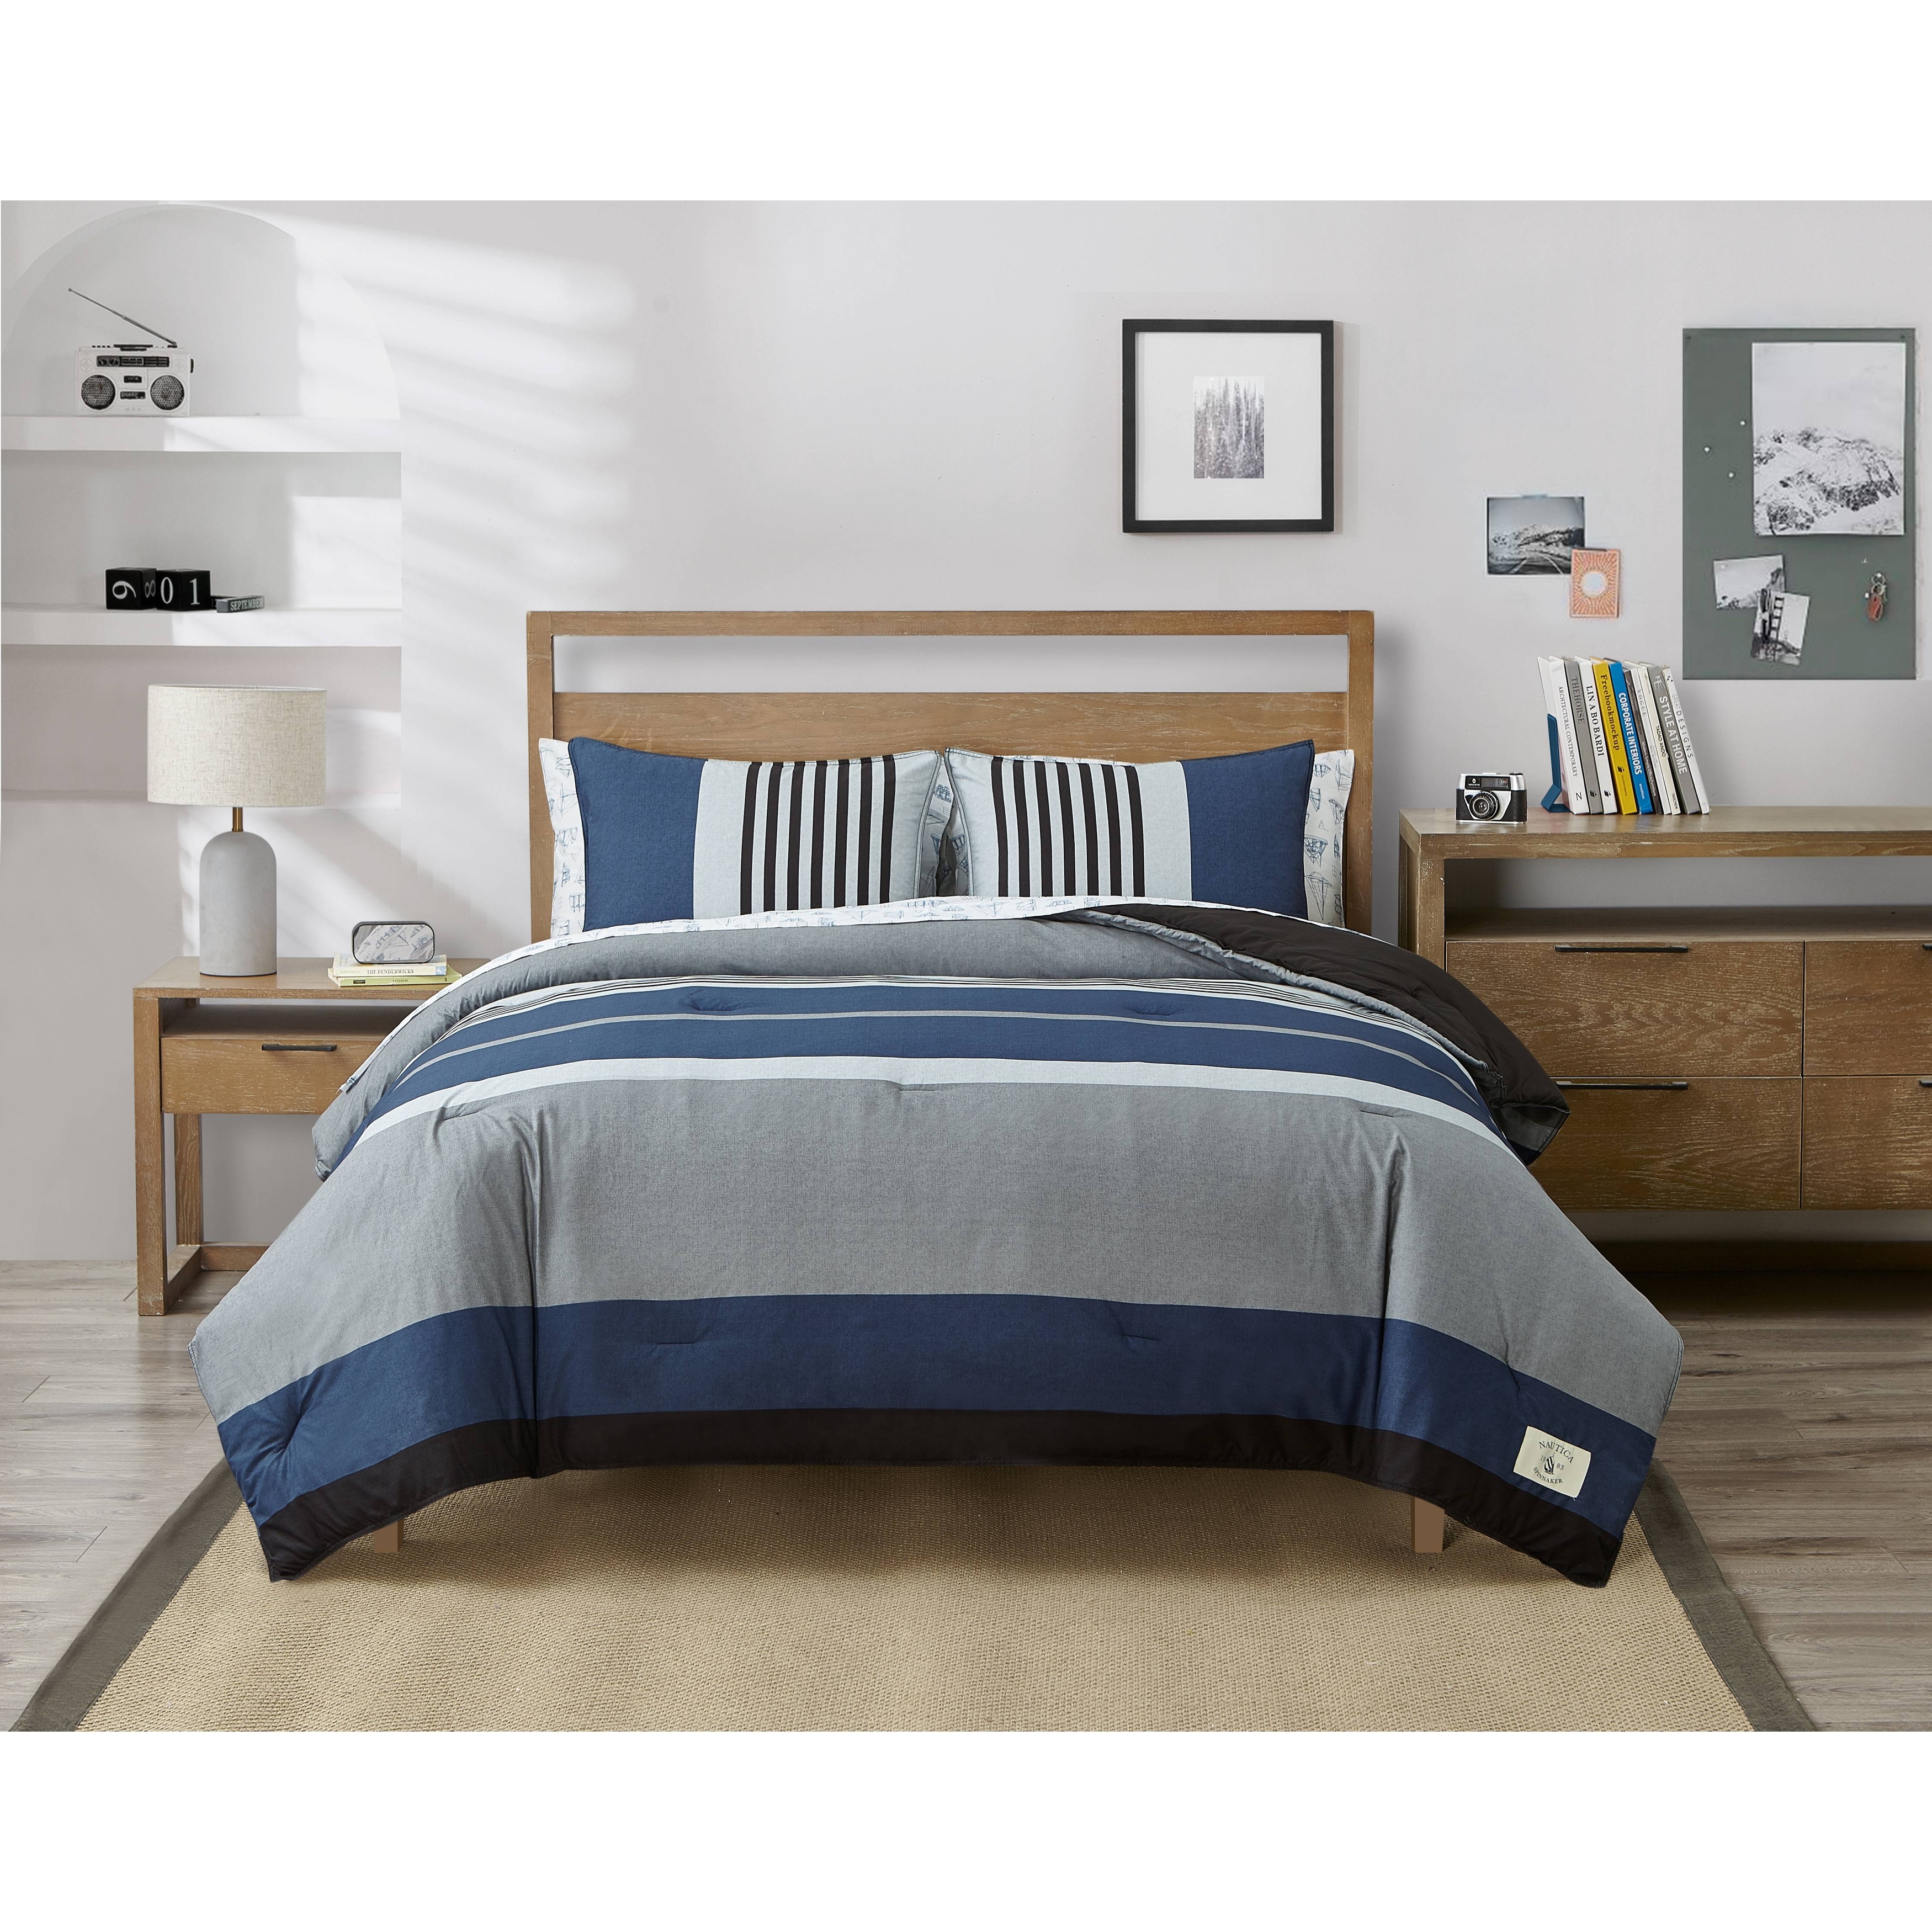 Nautica Comforters and Sets - Bed Bath & Beyond